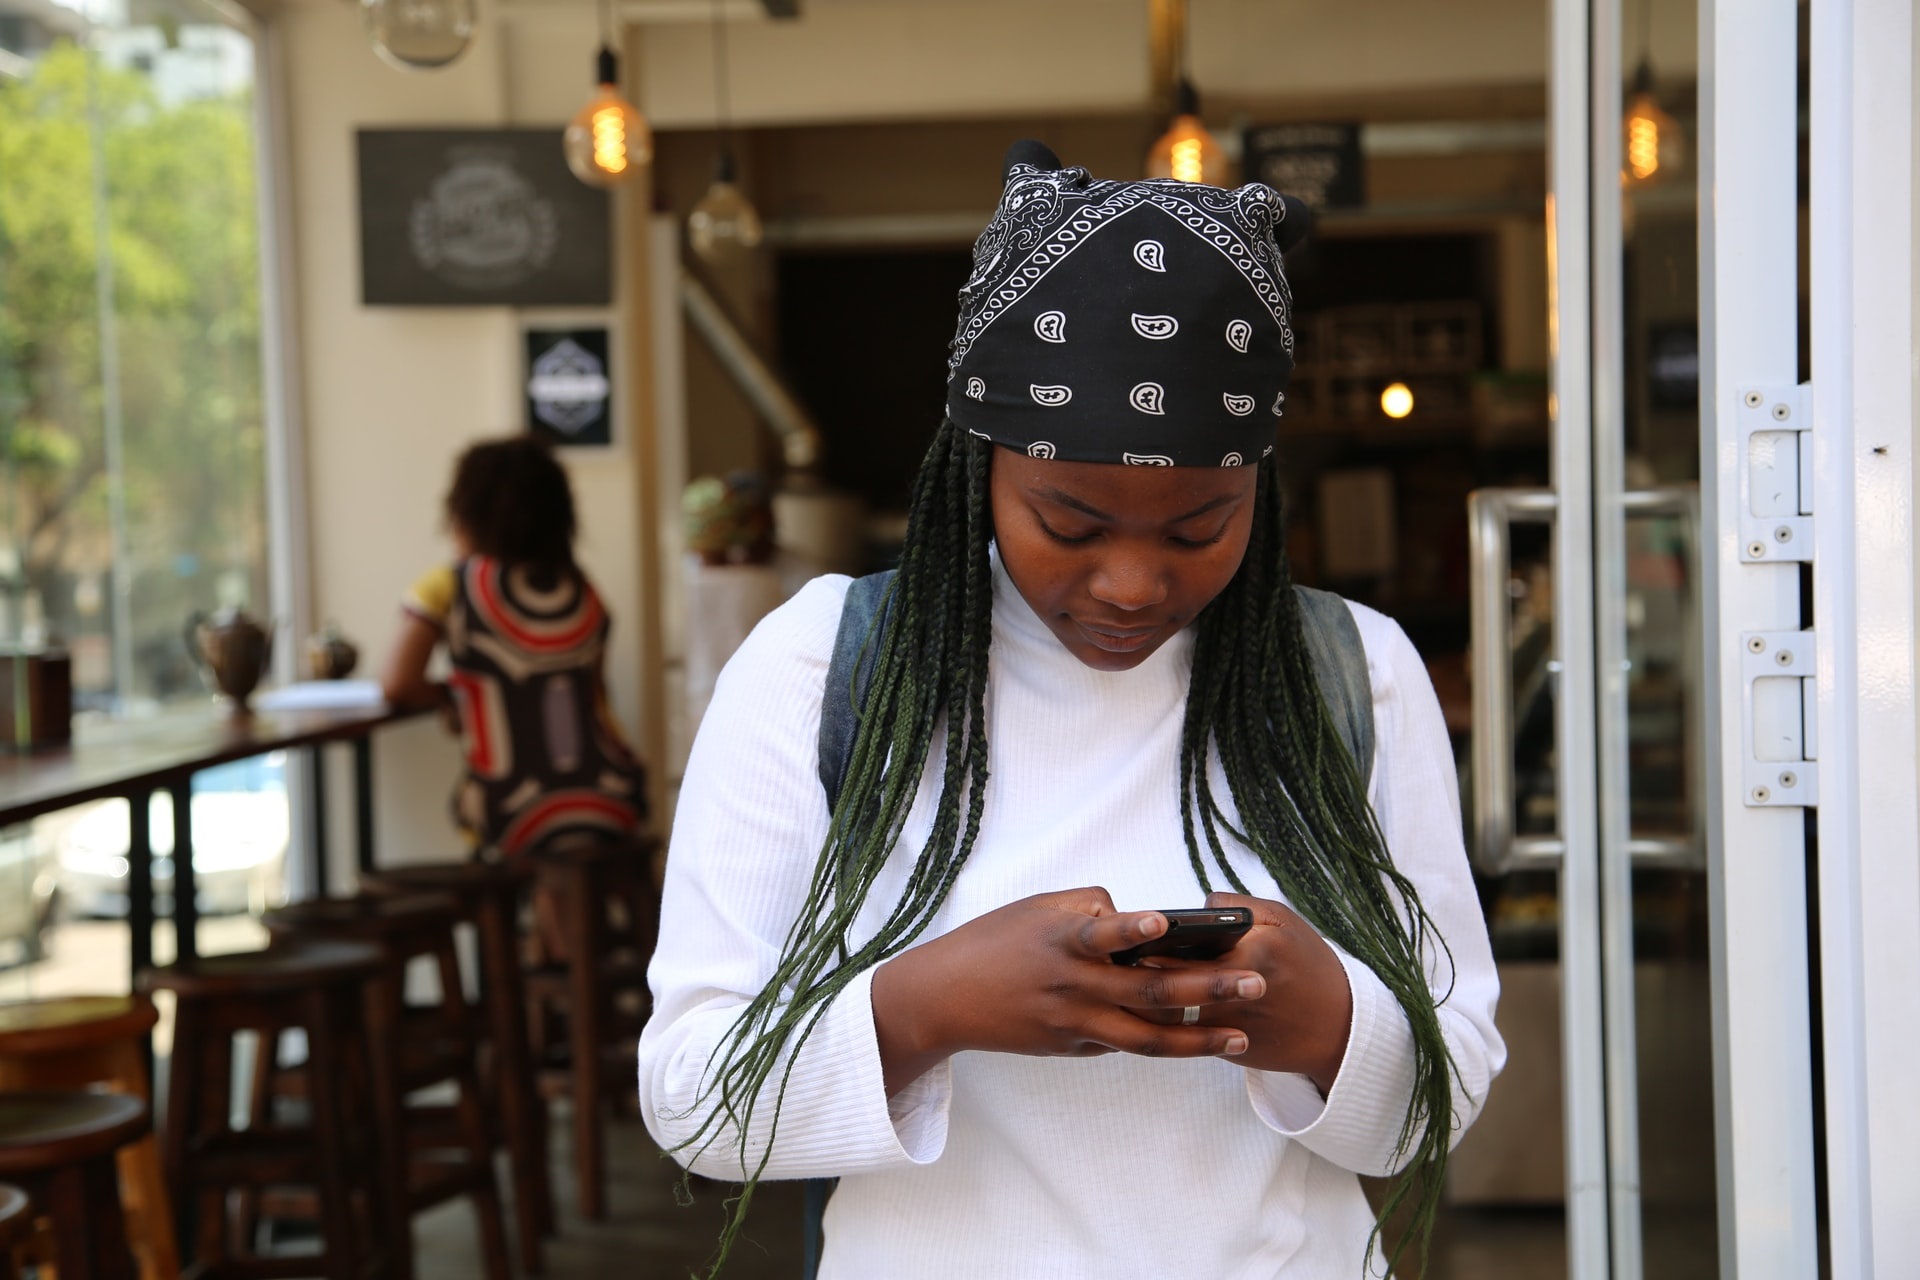 African young woman using a mobile phone in foreground in a building.